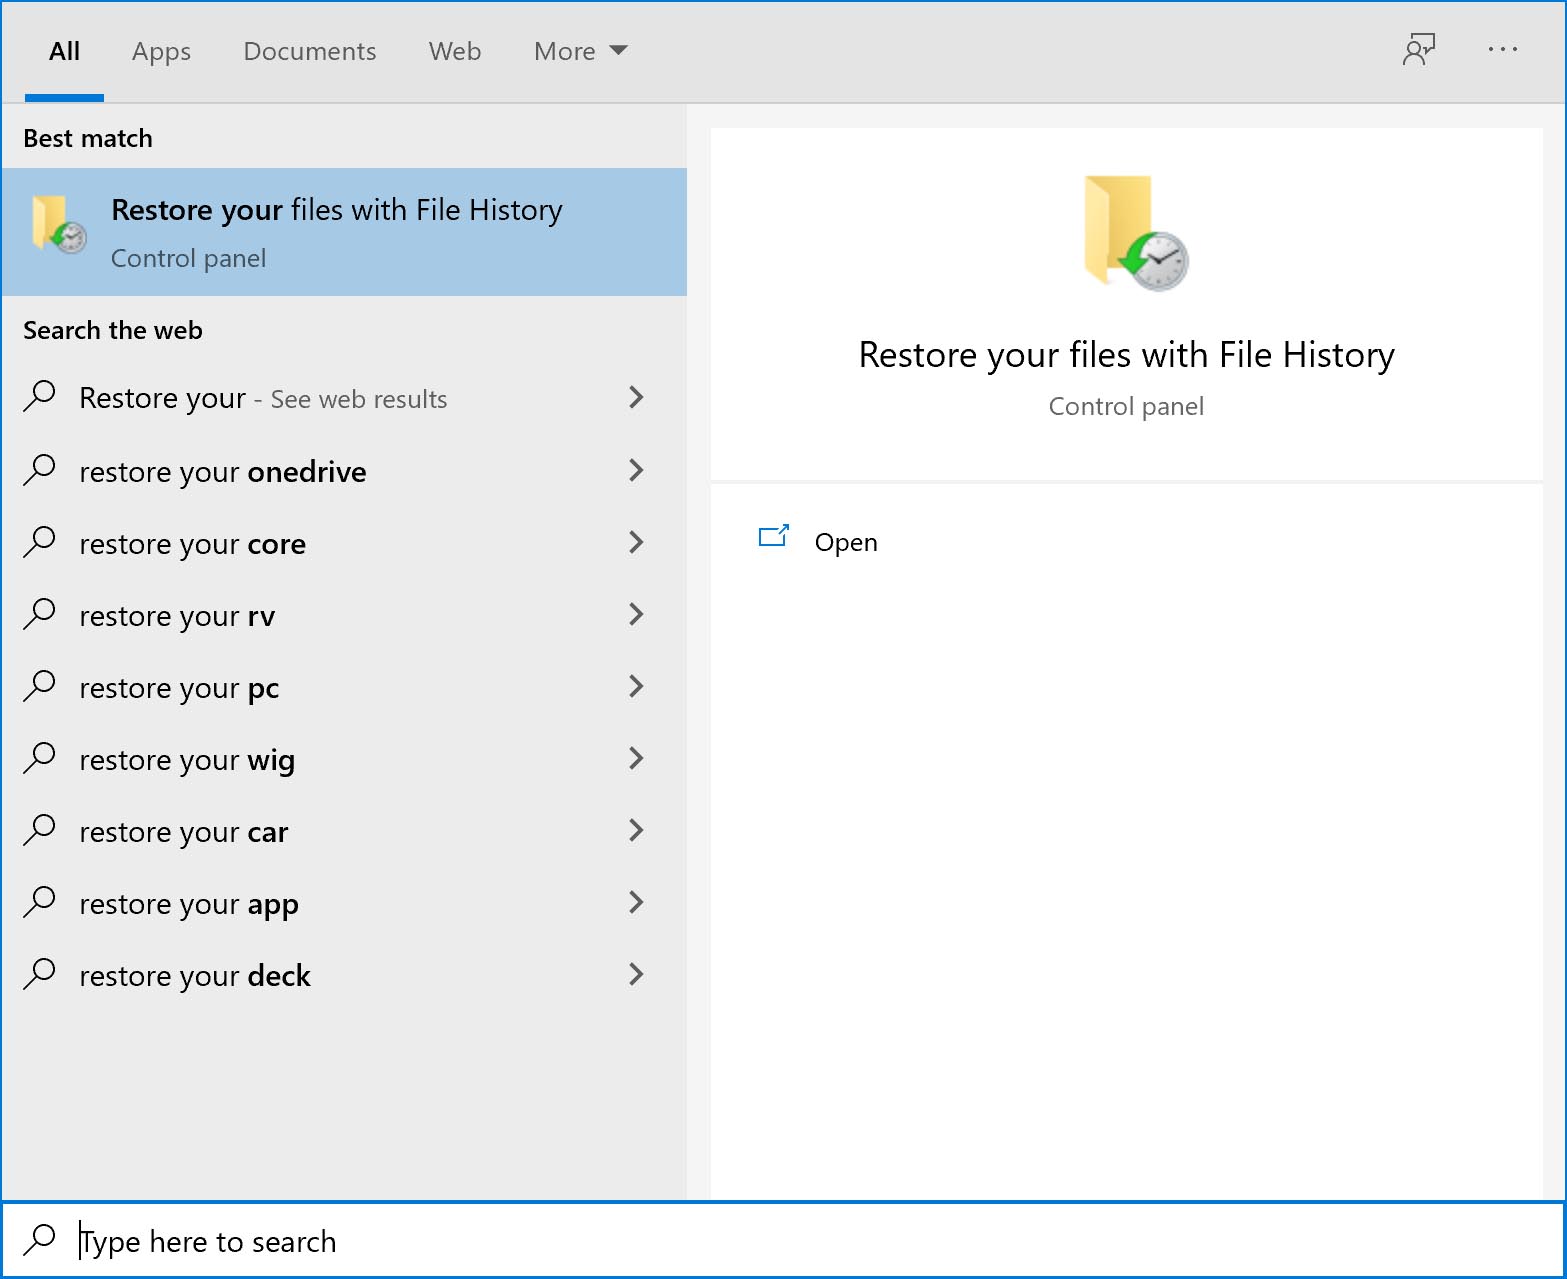 Restore your files with File History